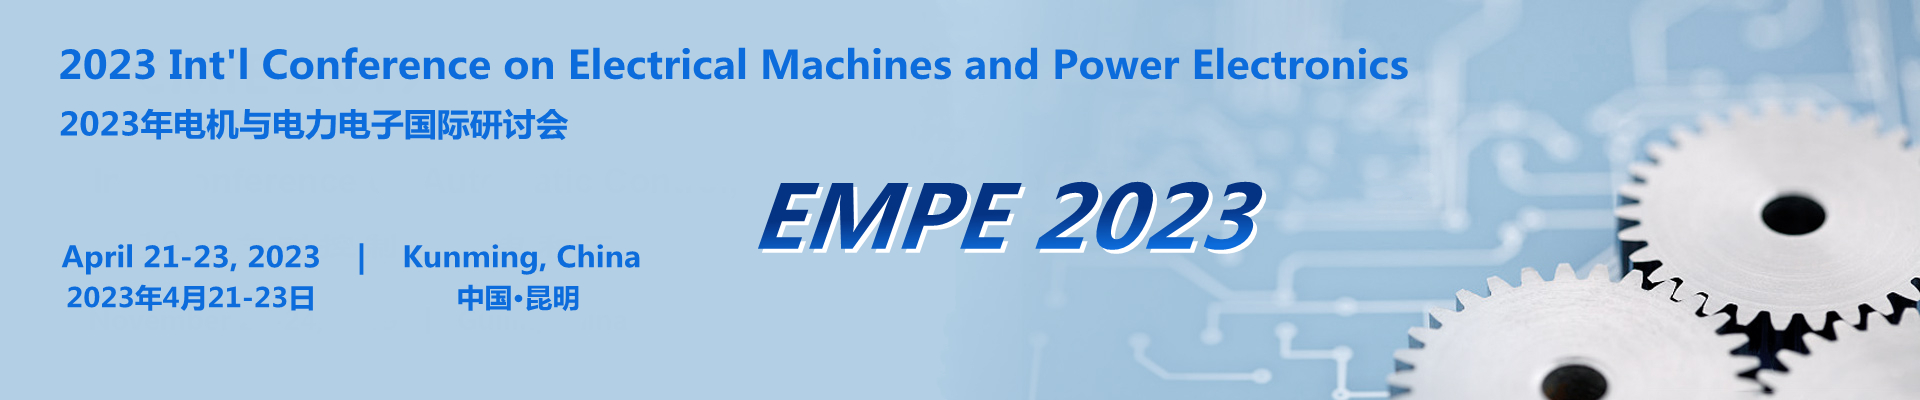 2023 Int'l Conference on Electrical Machines and Power Electronics (EMPE 2023), Kunming, Yunnan, China